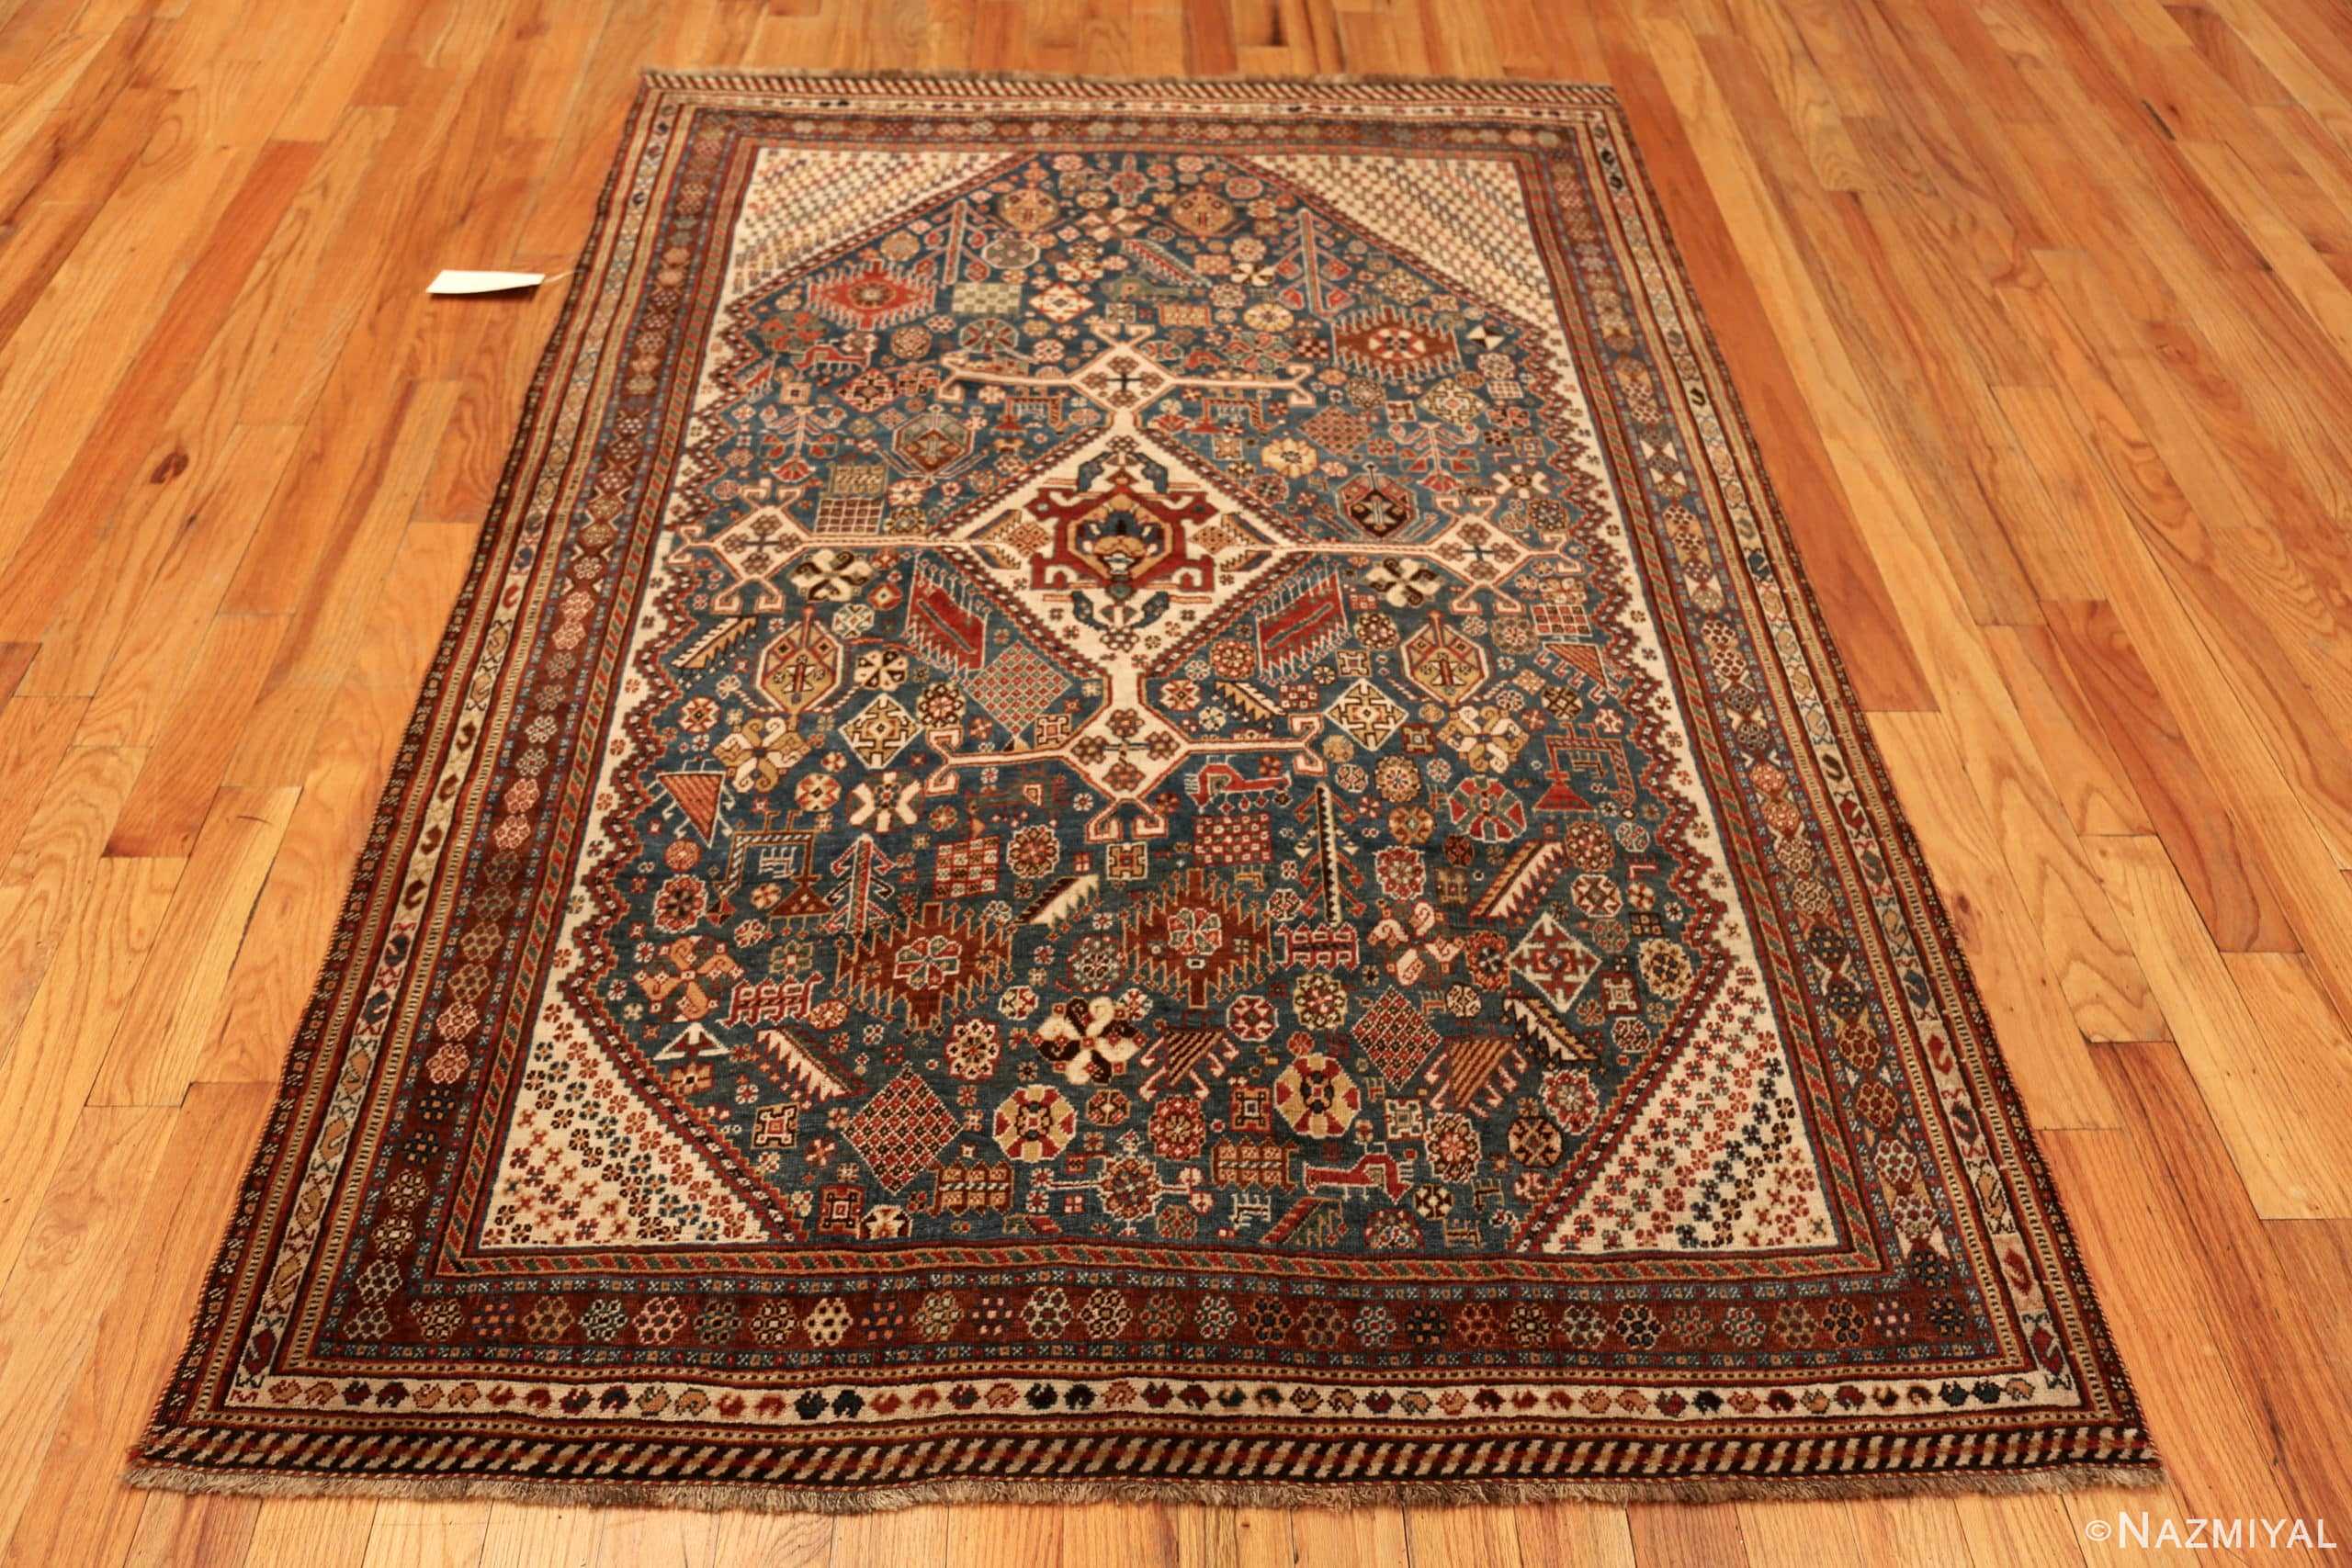 Whole View Of Blue Background Antique Persian Qashqai Rug 71457 by Nazmiyal Antique Rugs